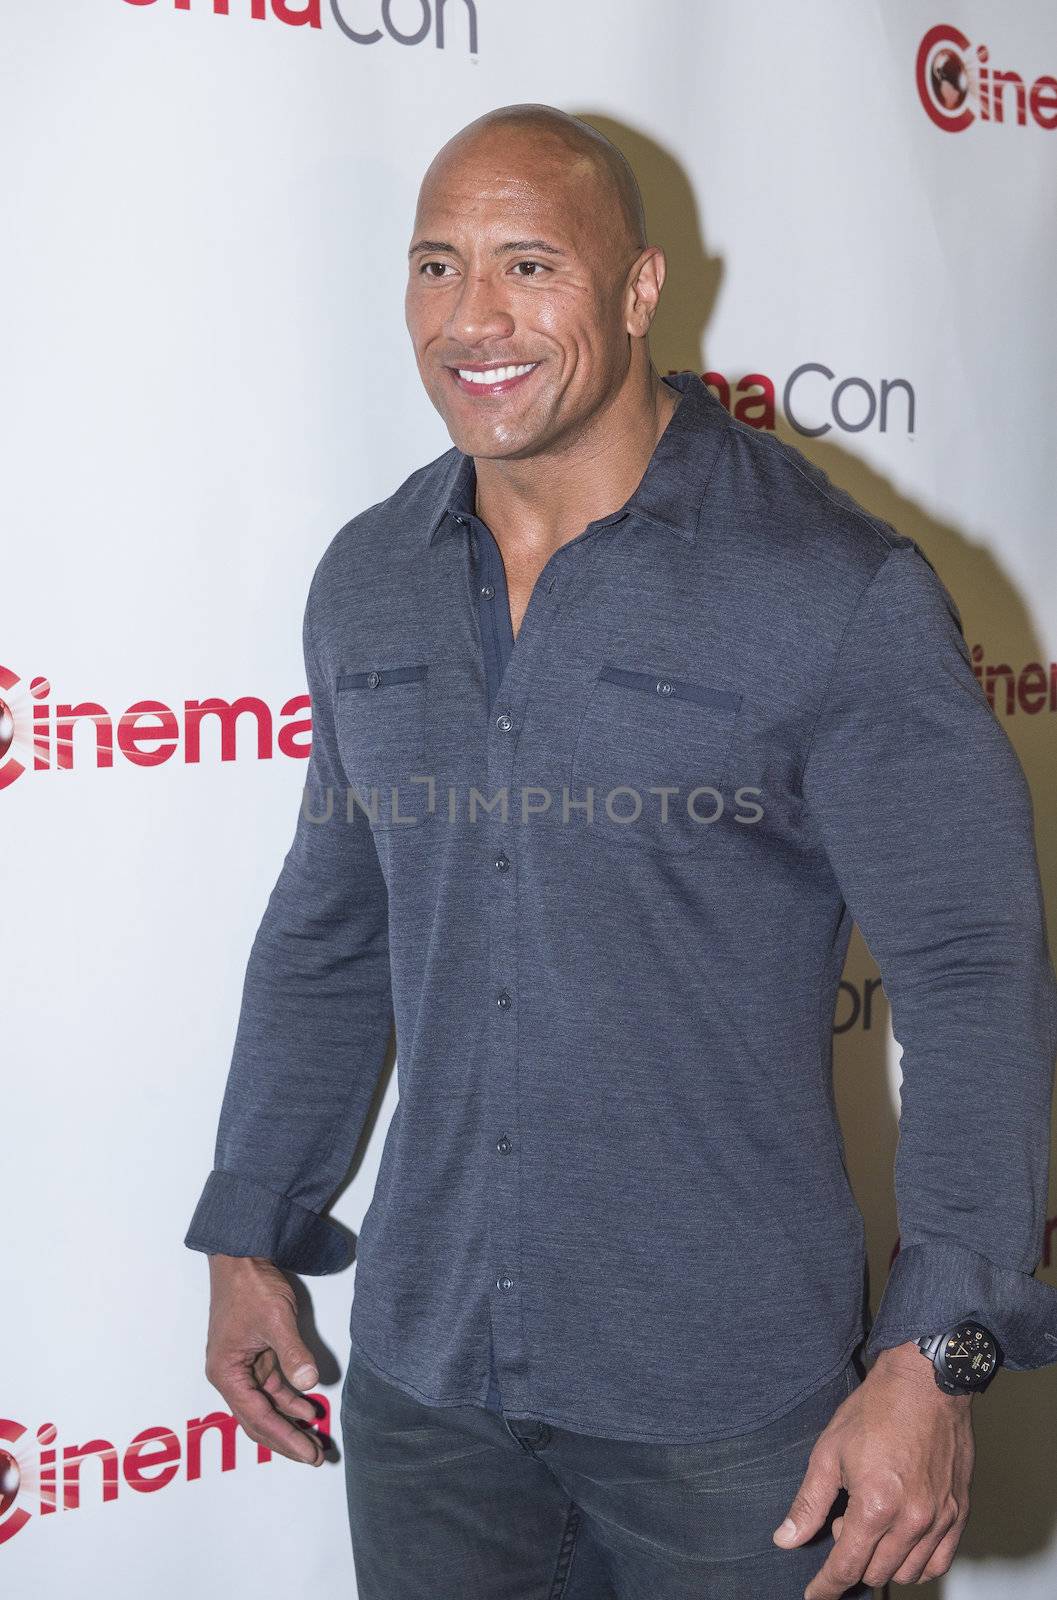 LAS VEGAS, NV - MARCH 24:  Dwayne Johnson (The Rock) arrives at the 2014 CinemaCon Paramount opening night presentation at Caesars Palace on March 24, 2014 in Las Vegas, Nevada